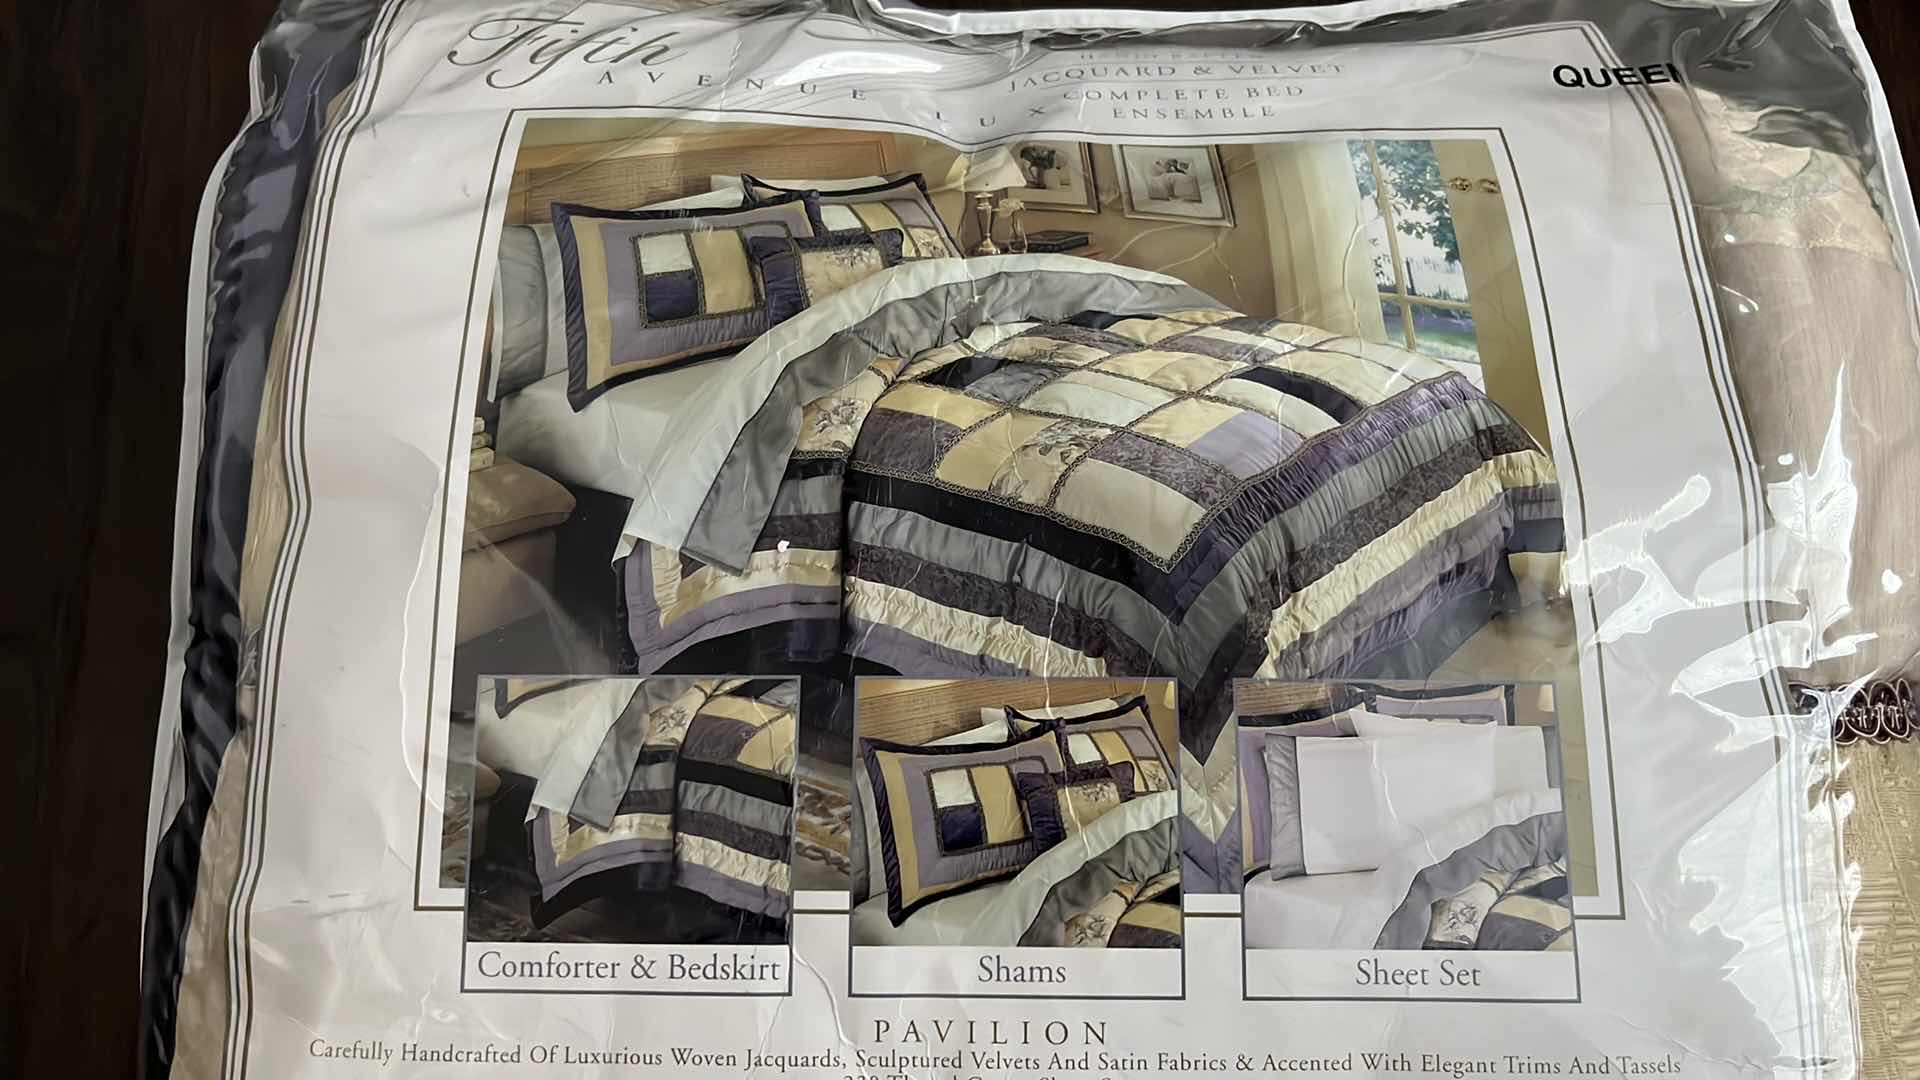 Photo 3 of NEW FIFTH AVENUE LUX HANDCRAFTED JACQUARD & VELVET COMPLETE BED ENSEMBLE SIZE QUEEN #BIB0995 PAVILIN Q